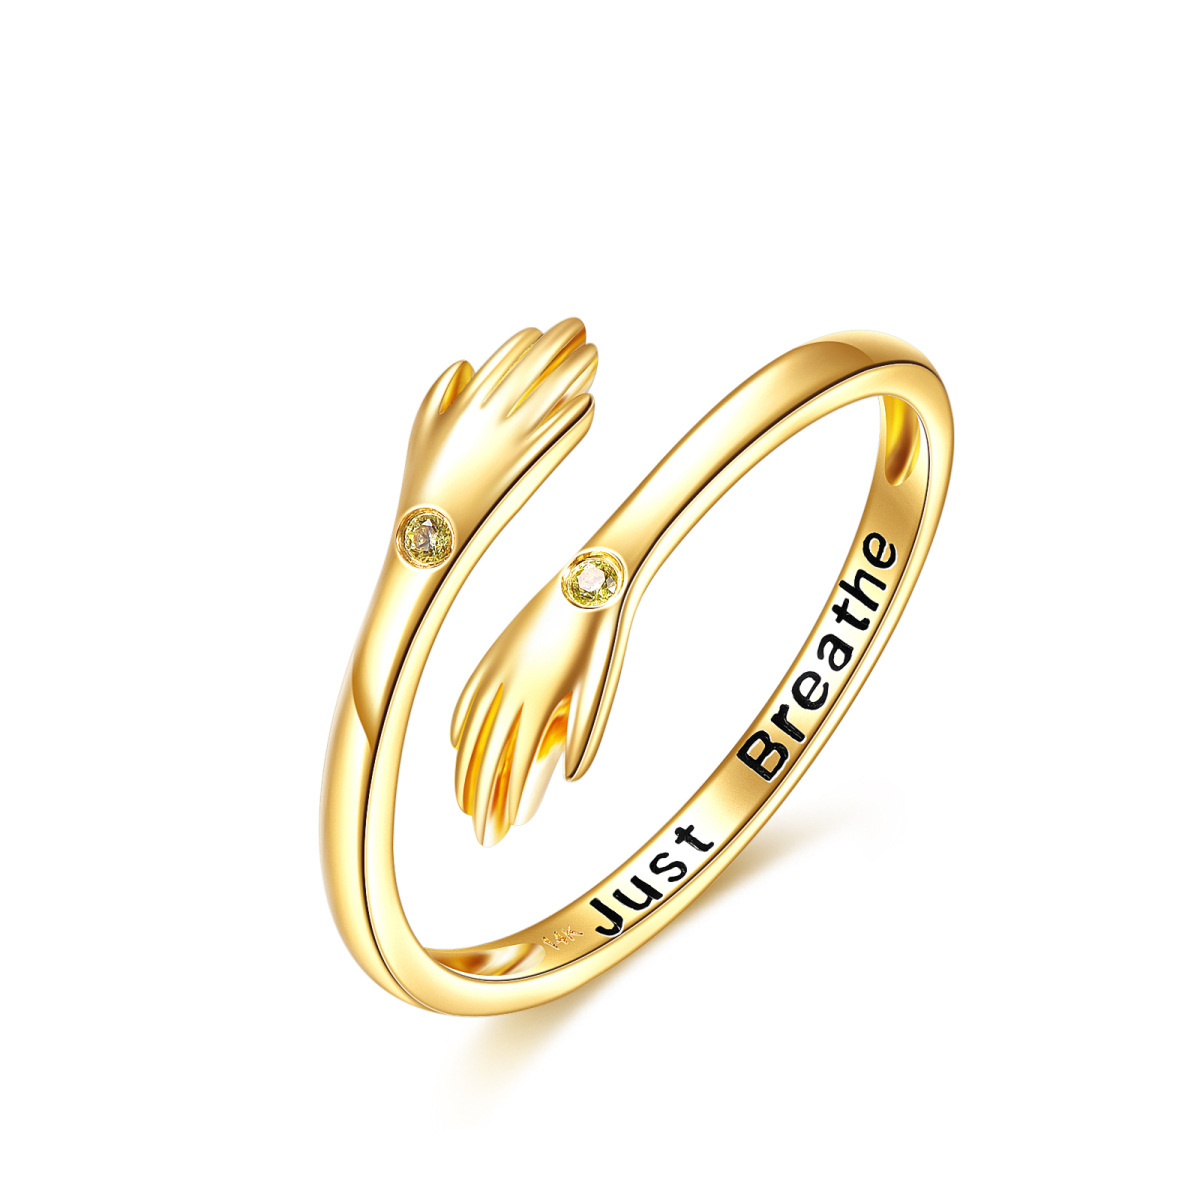 14K Gold Cubic Zirconia Hug Open Ring with Engraved Word-1